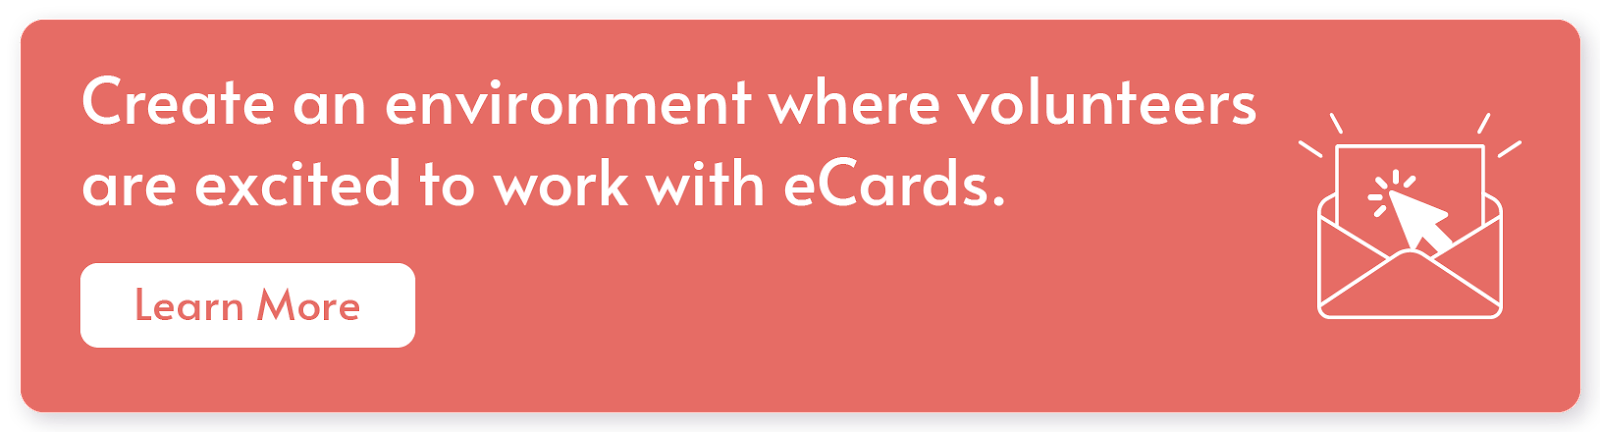 Create an environment where volunteers are excited to work with eCards. Learn more.